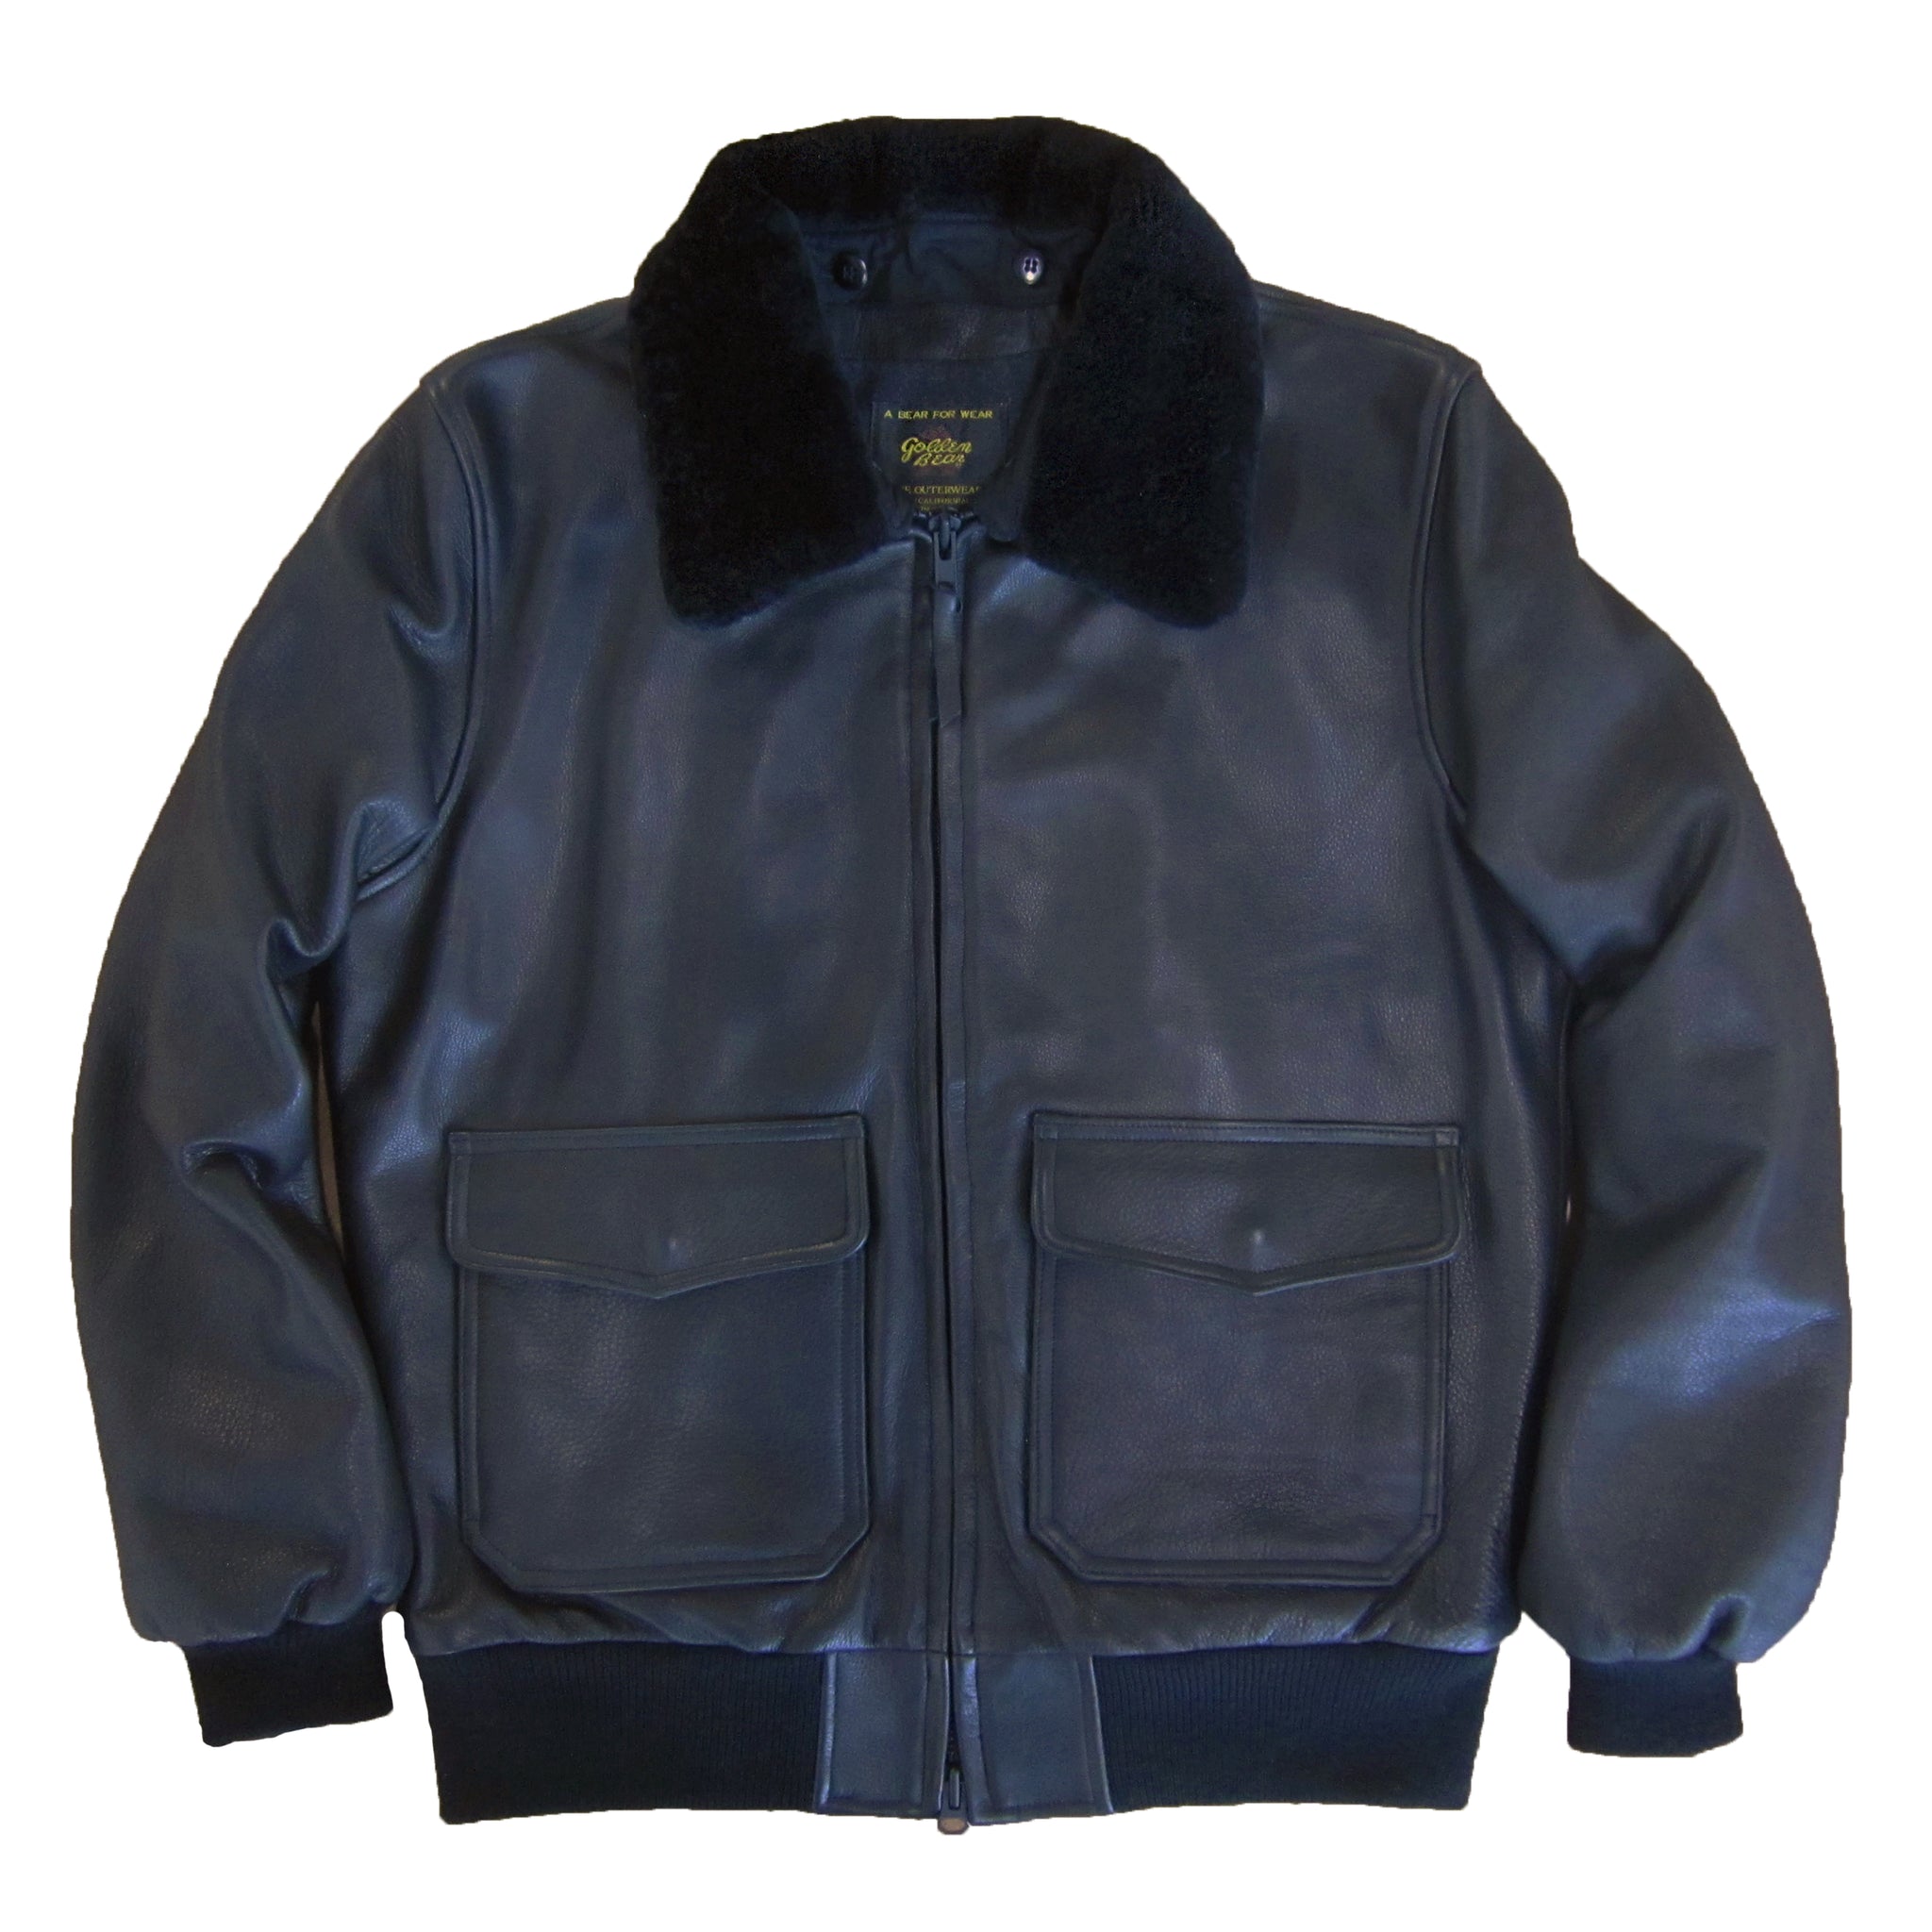 The Carter - Black Naked Leather Bomber Jacket with Detachable Fur Collar - Golden Bear Sportswear 